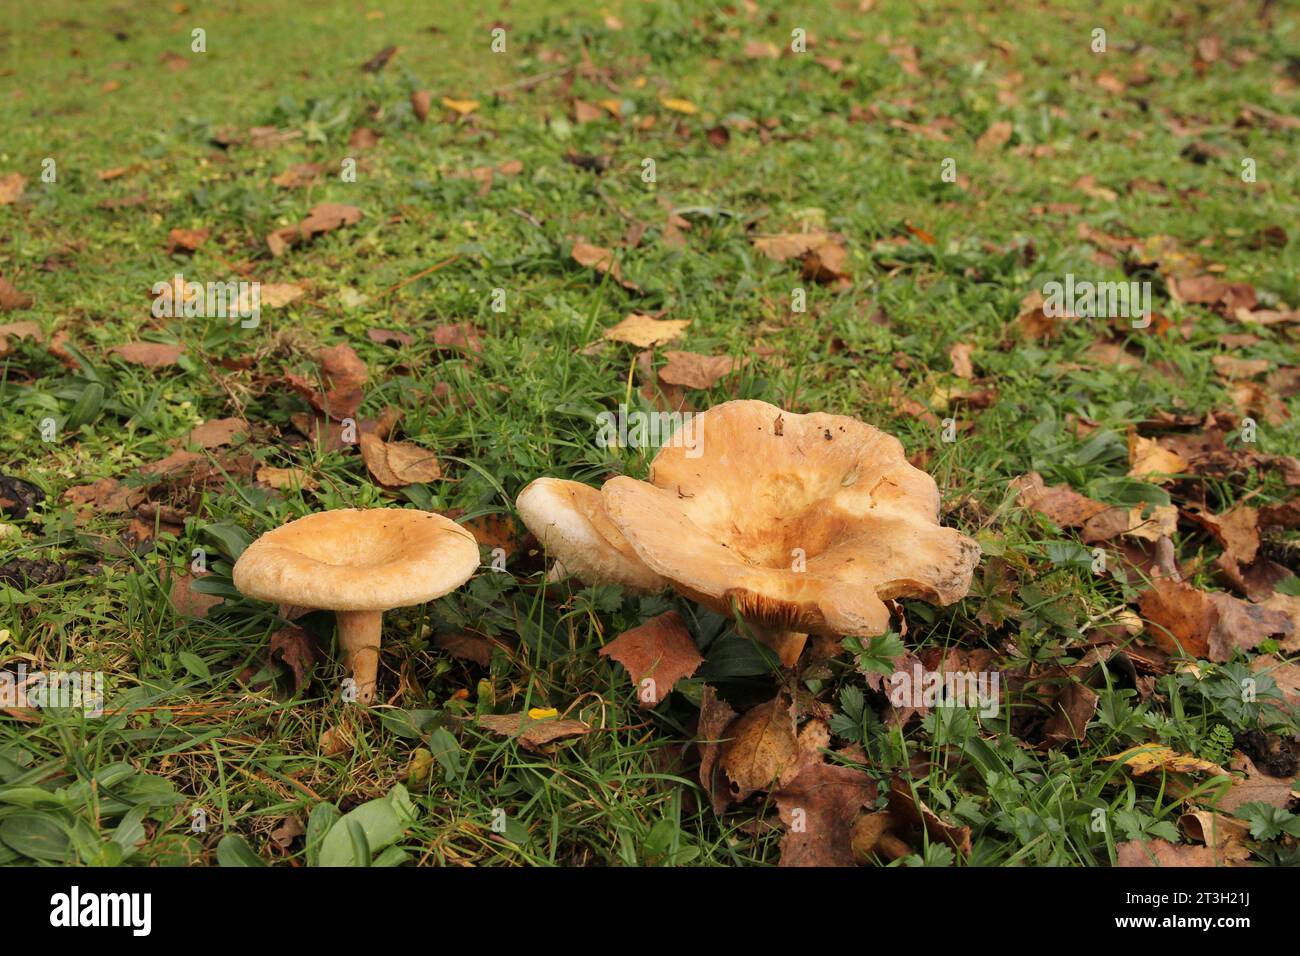 a group brown russula mushrooms in a green meadow in a forest Stock Photo